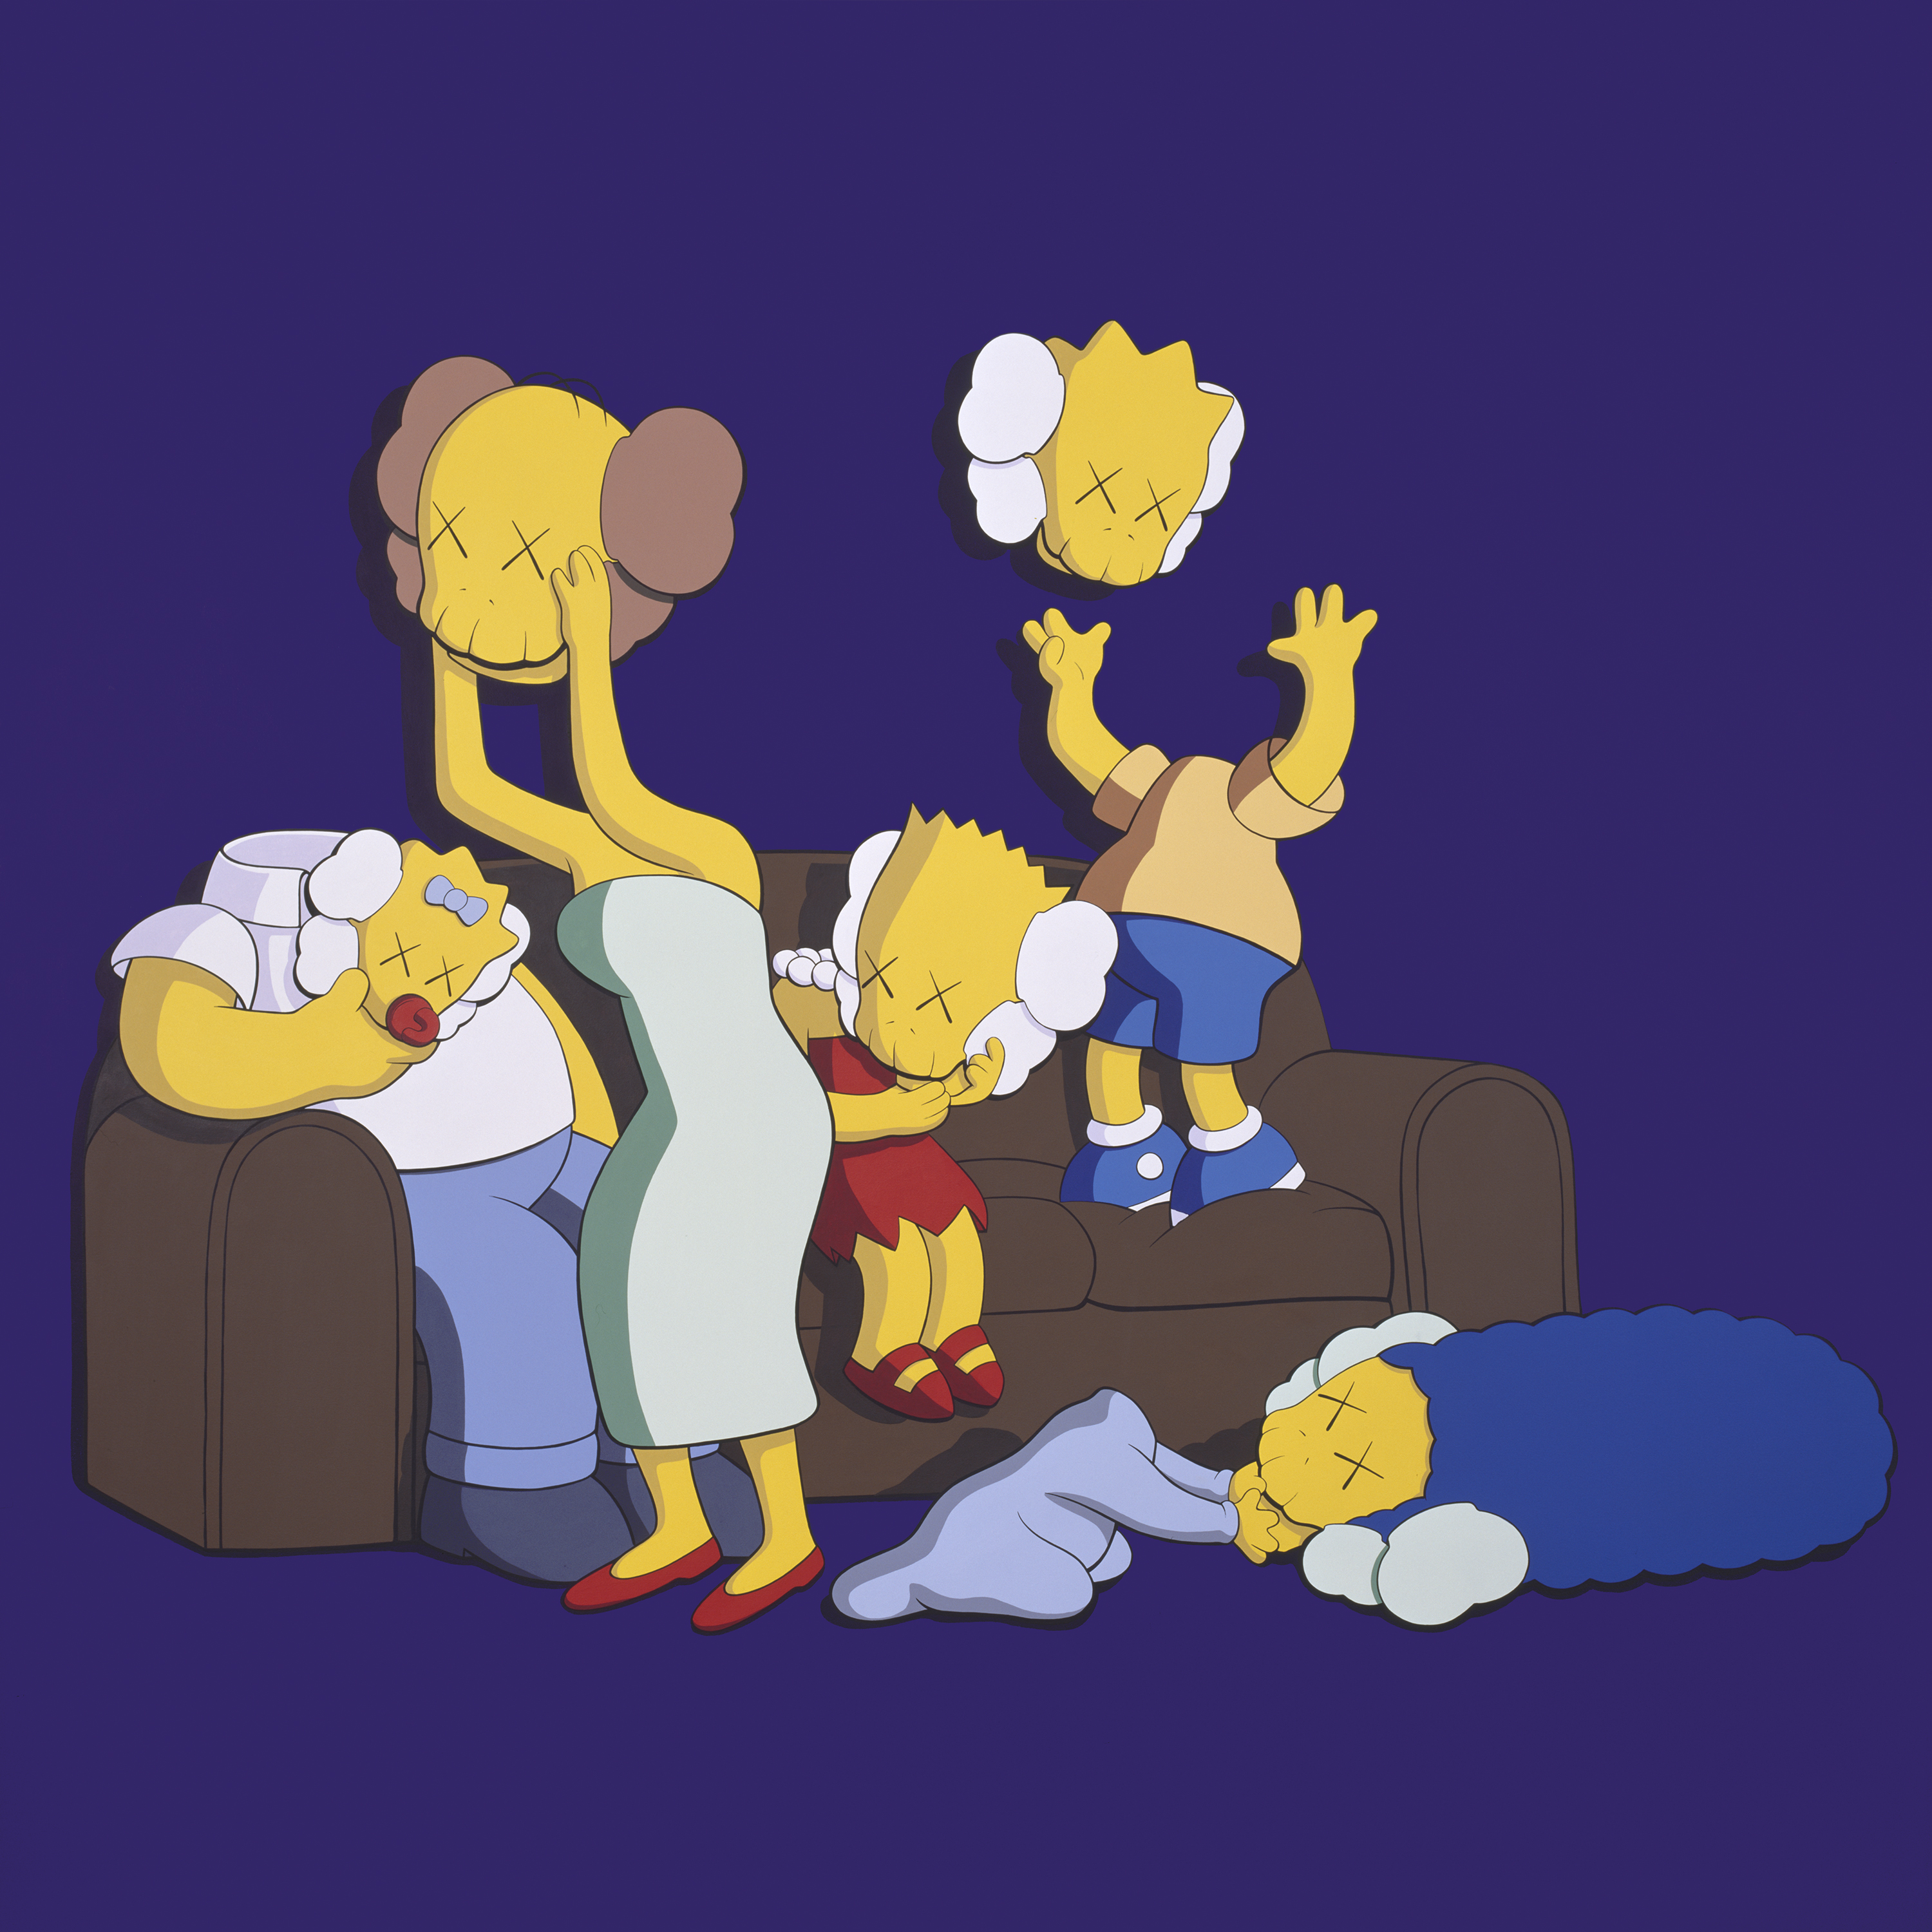 KAWS (American, born 1974). UNTITLED (KIMPSONS #2), 2004. Acrylic on canvas, 80 × 80 in. (203.2 × 203.2 cm). Courtesy of Larry Warsh. © KAWS